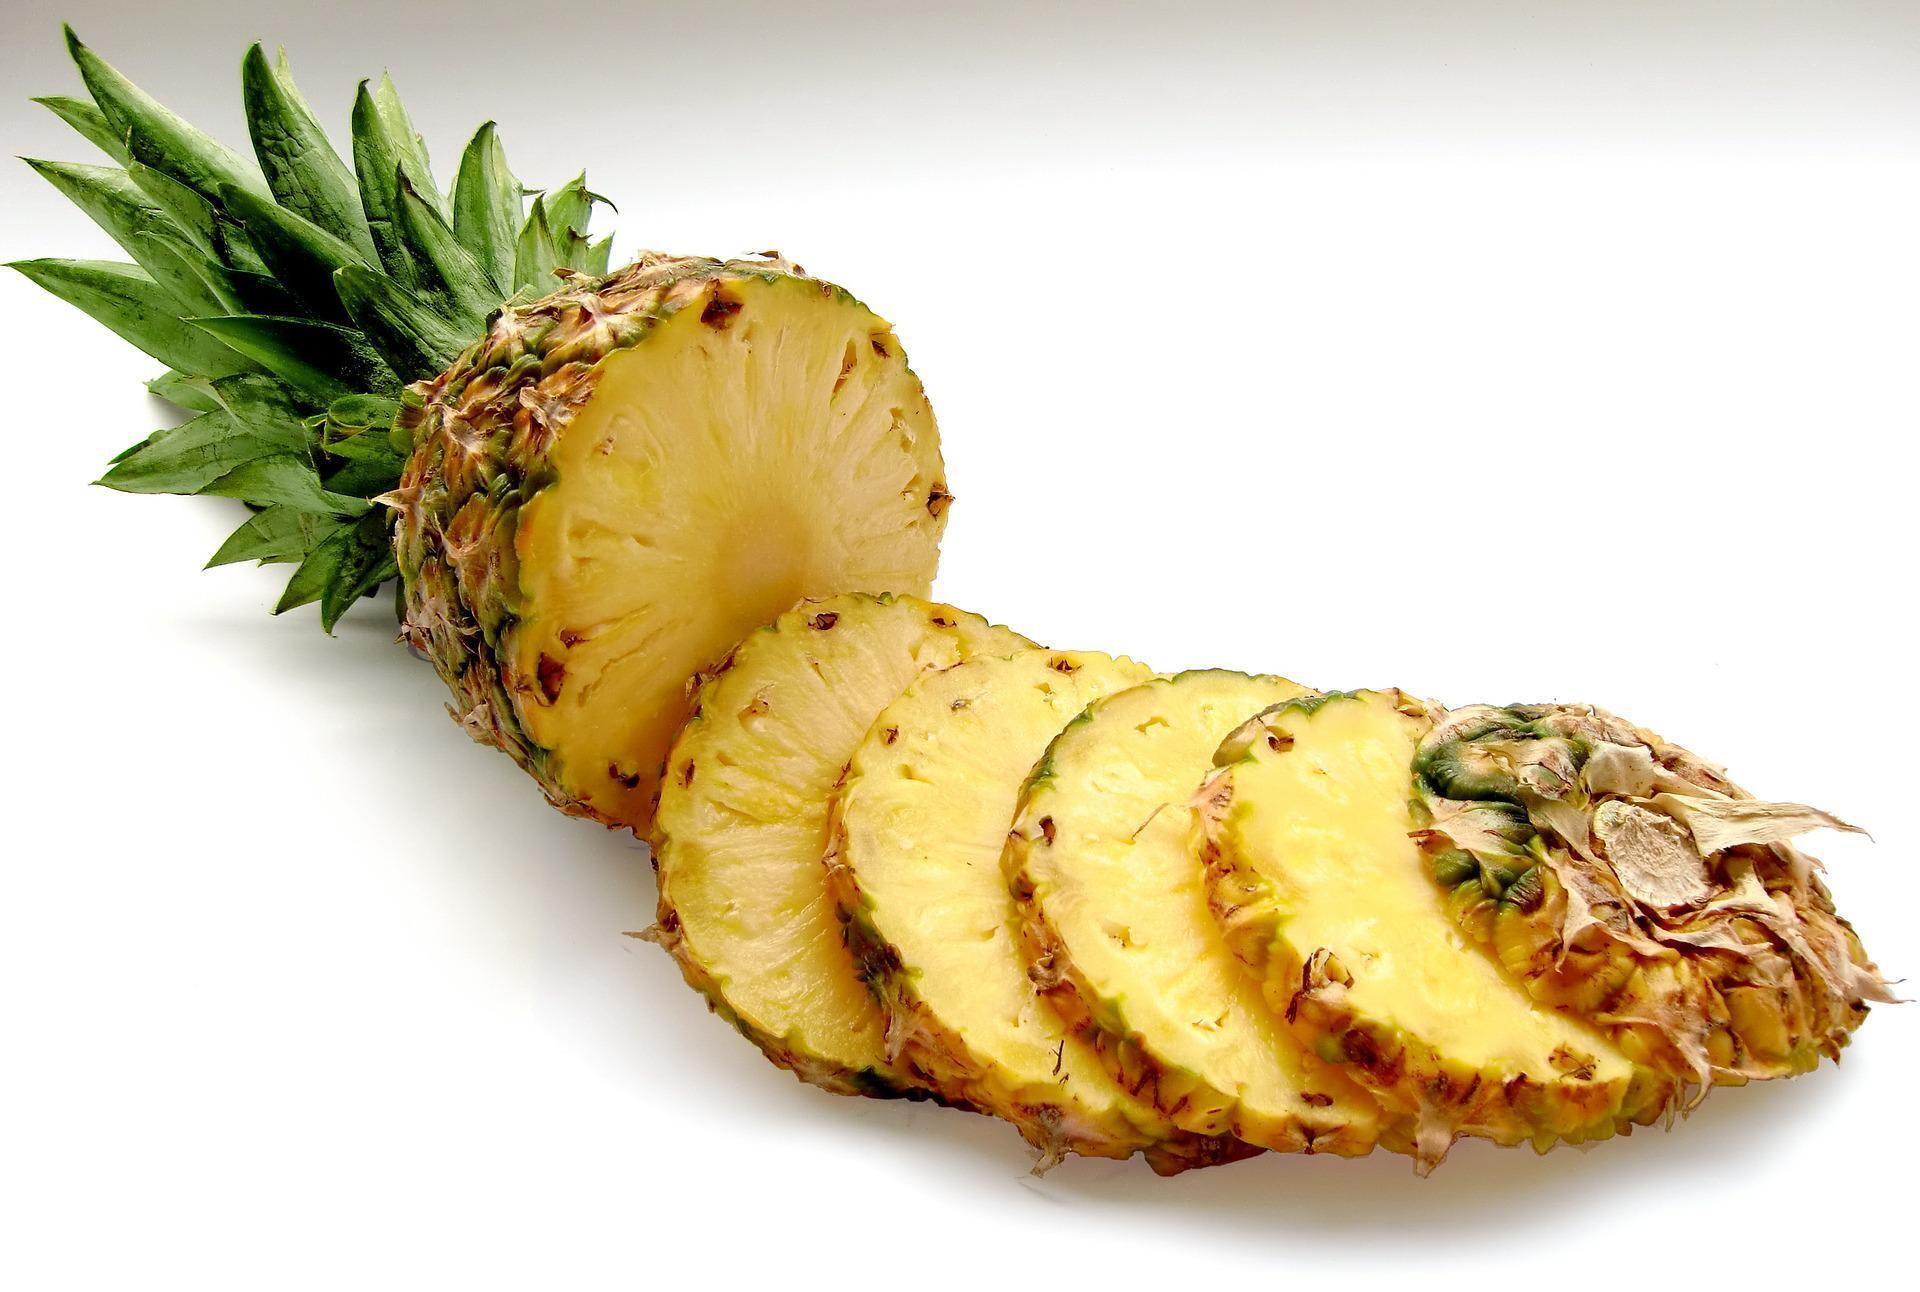 Pineapple for the salad